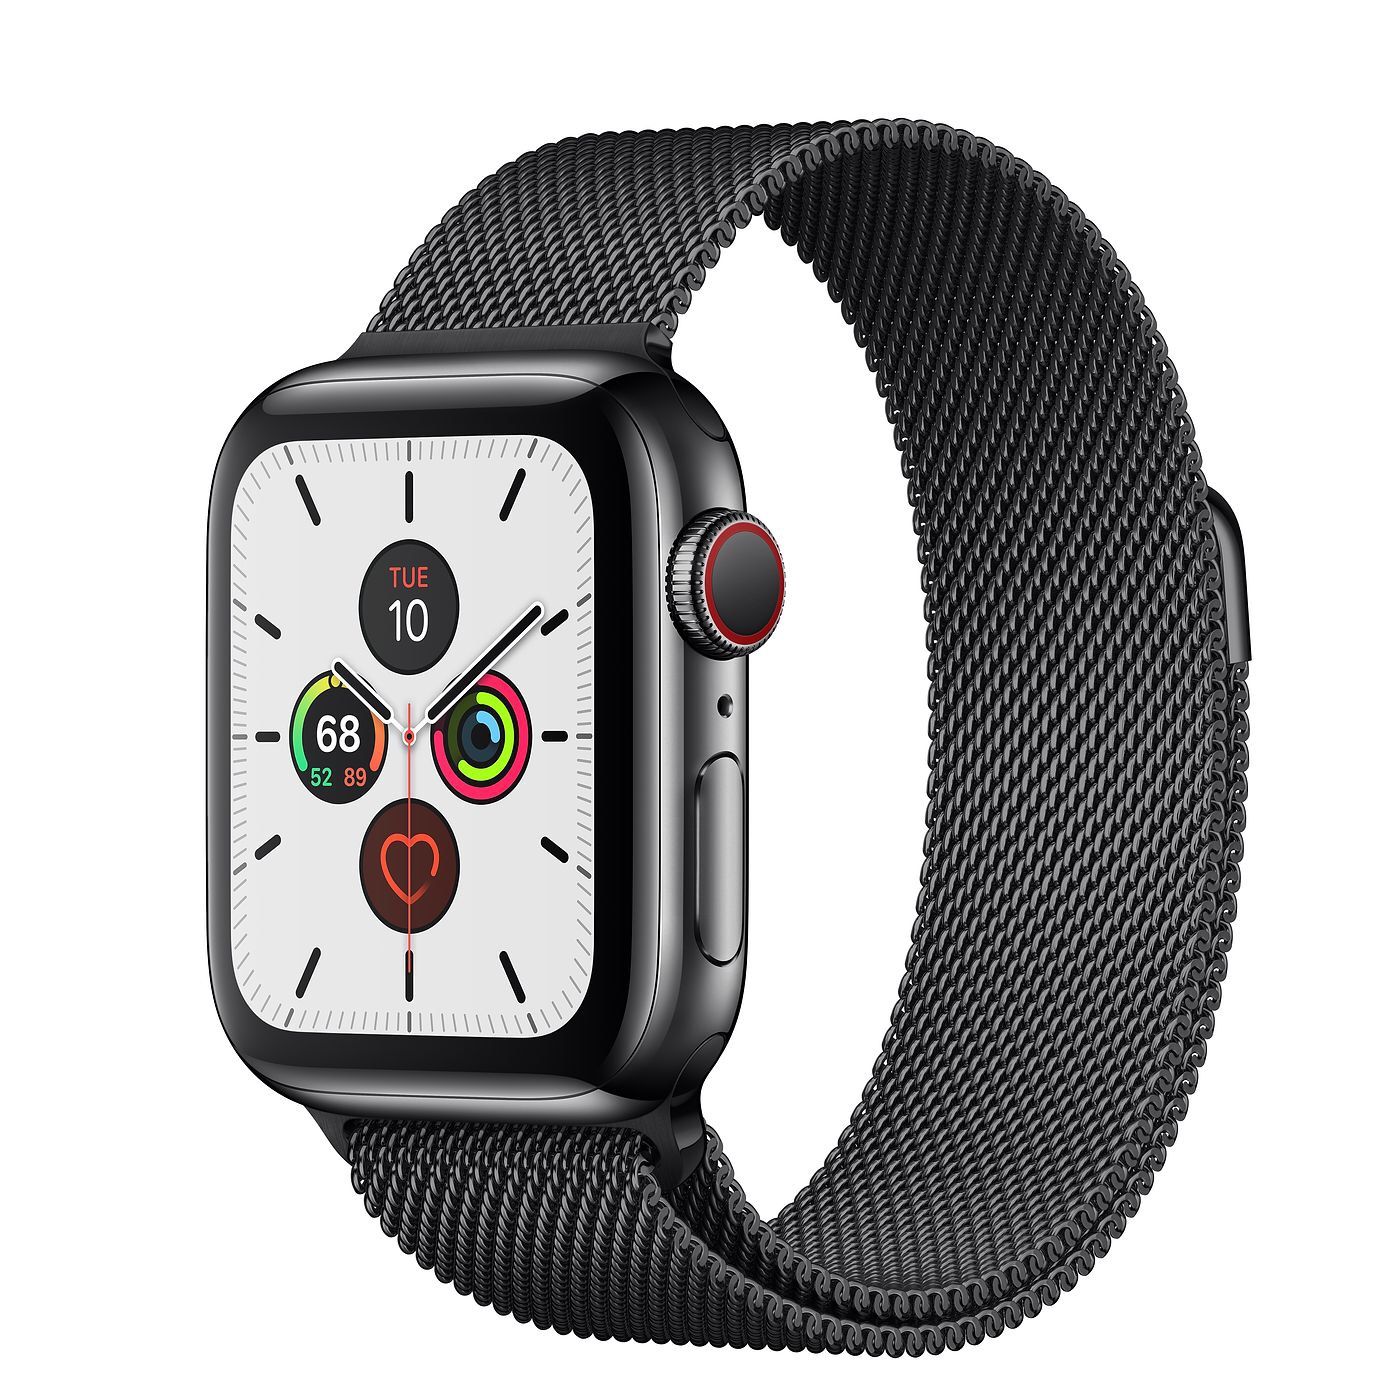 APPLE WATCH SERIES 5 GPS/LTE STAINLESS STEEL BLACK 44mm. WITH STAINLESS STEEL BLACK BAND. NEW!!